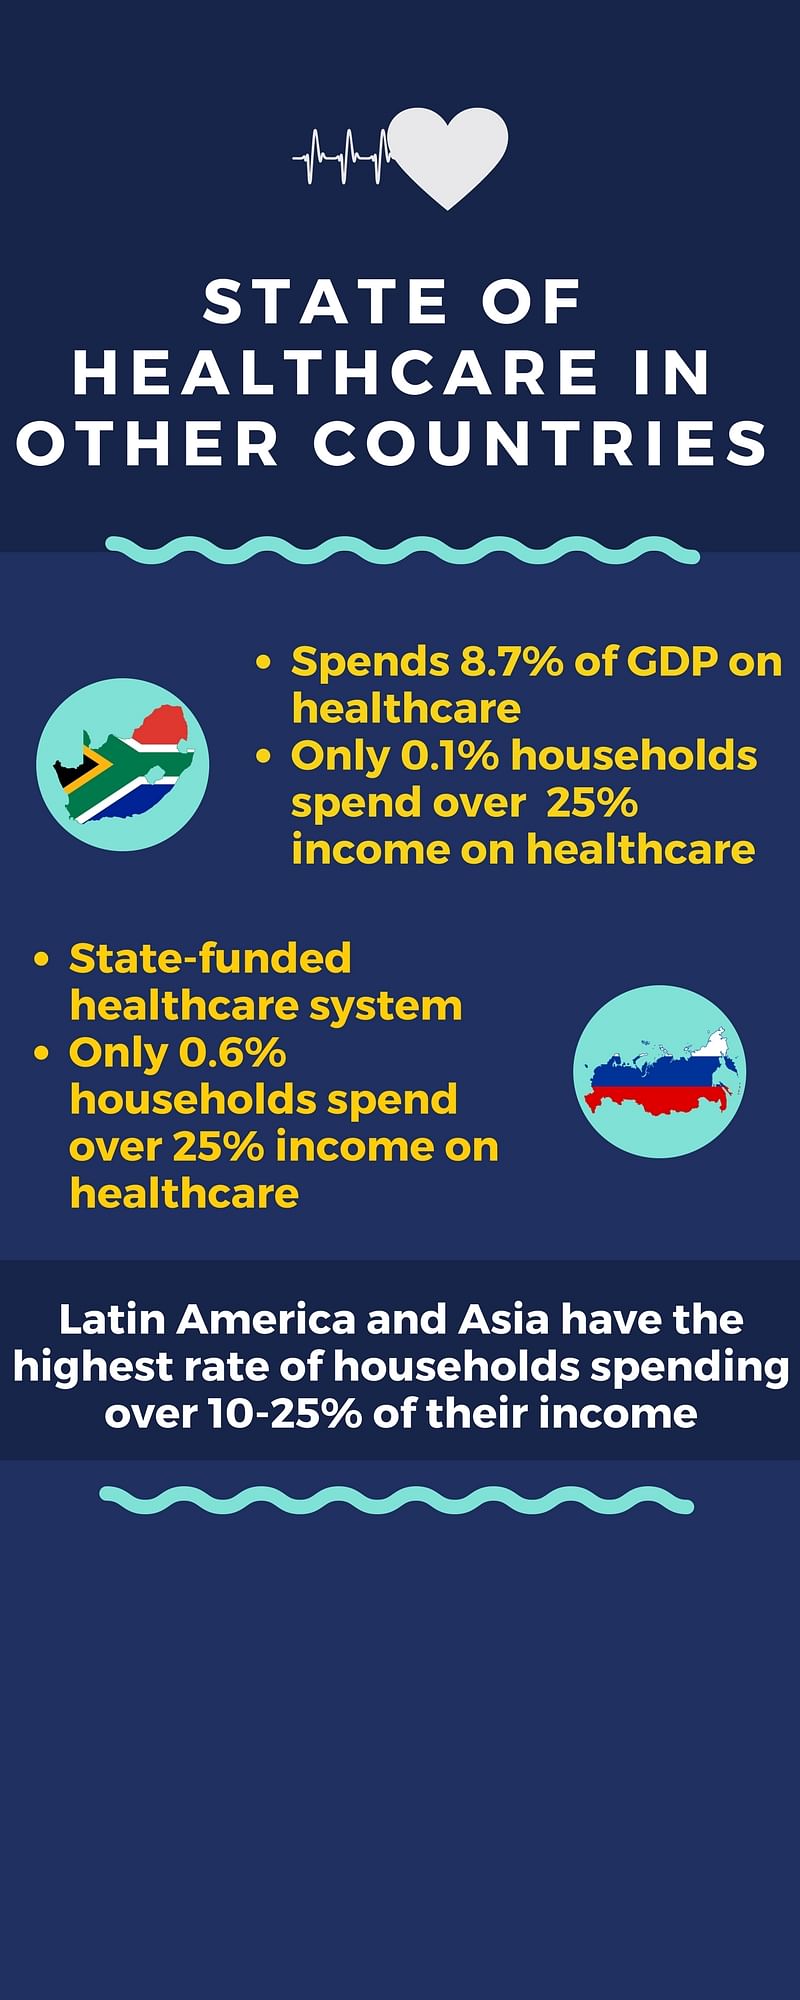 At least a 100 million people in the world are being thrust into poverty due to unaffordable healthcare.